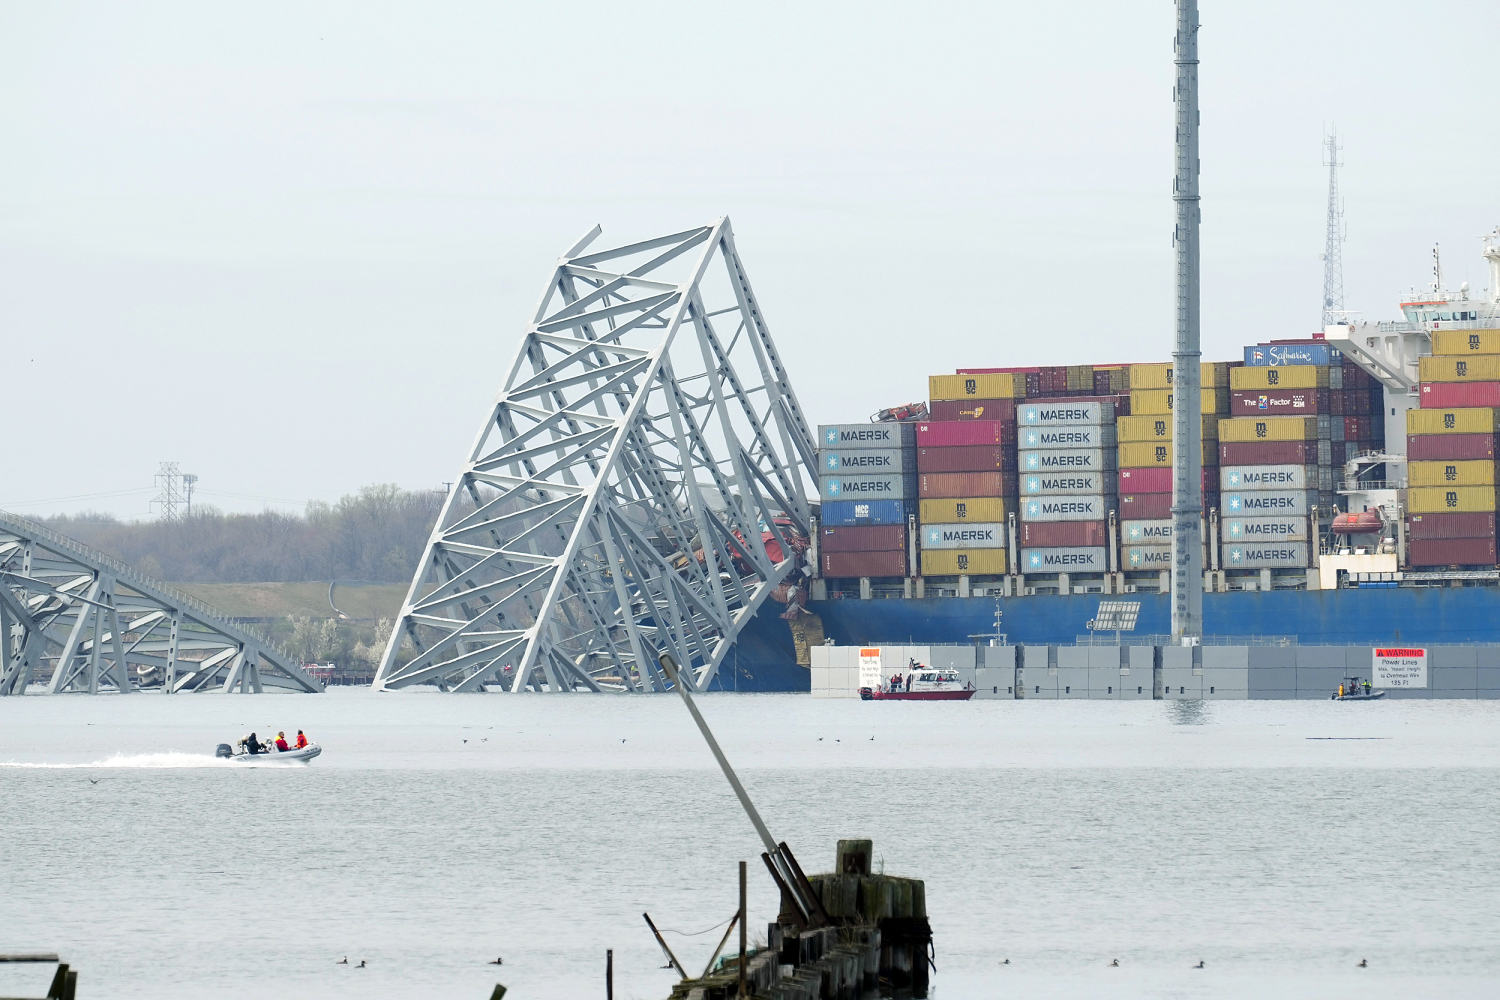 Unfounded conspiracy theories spread online after Baltimore bridge collapse